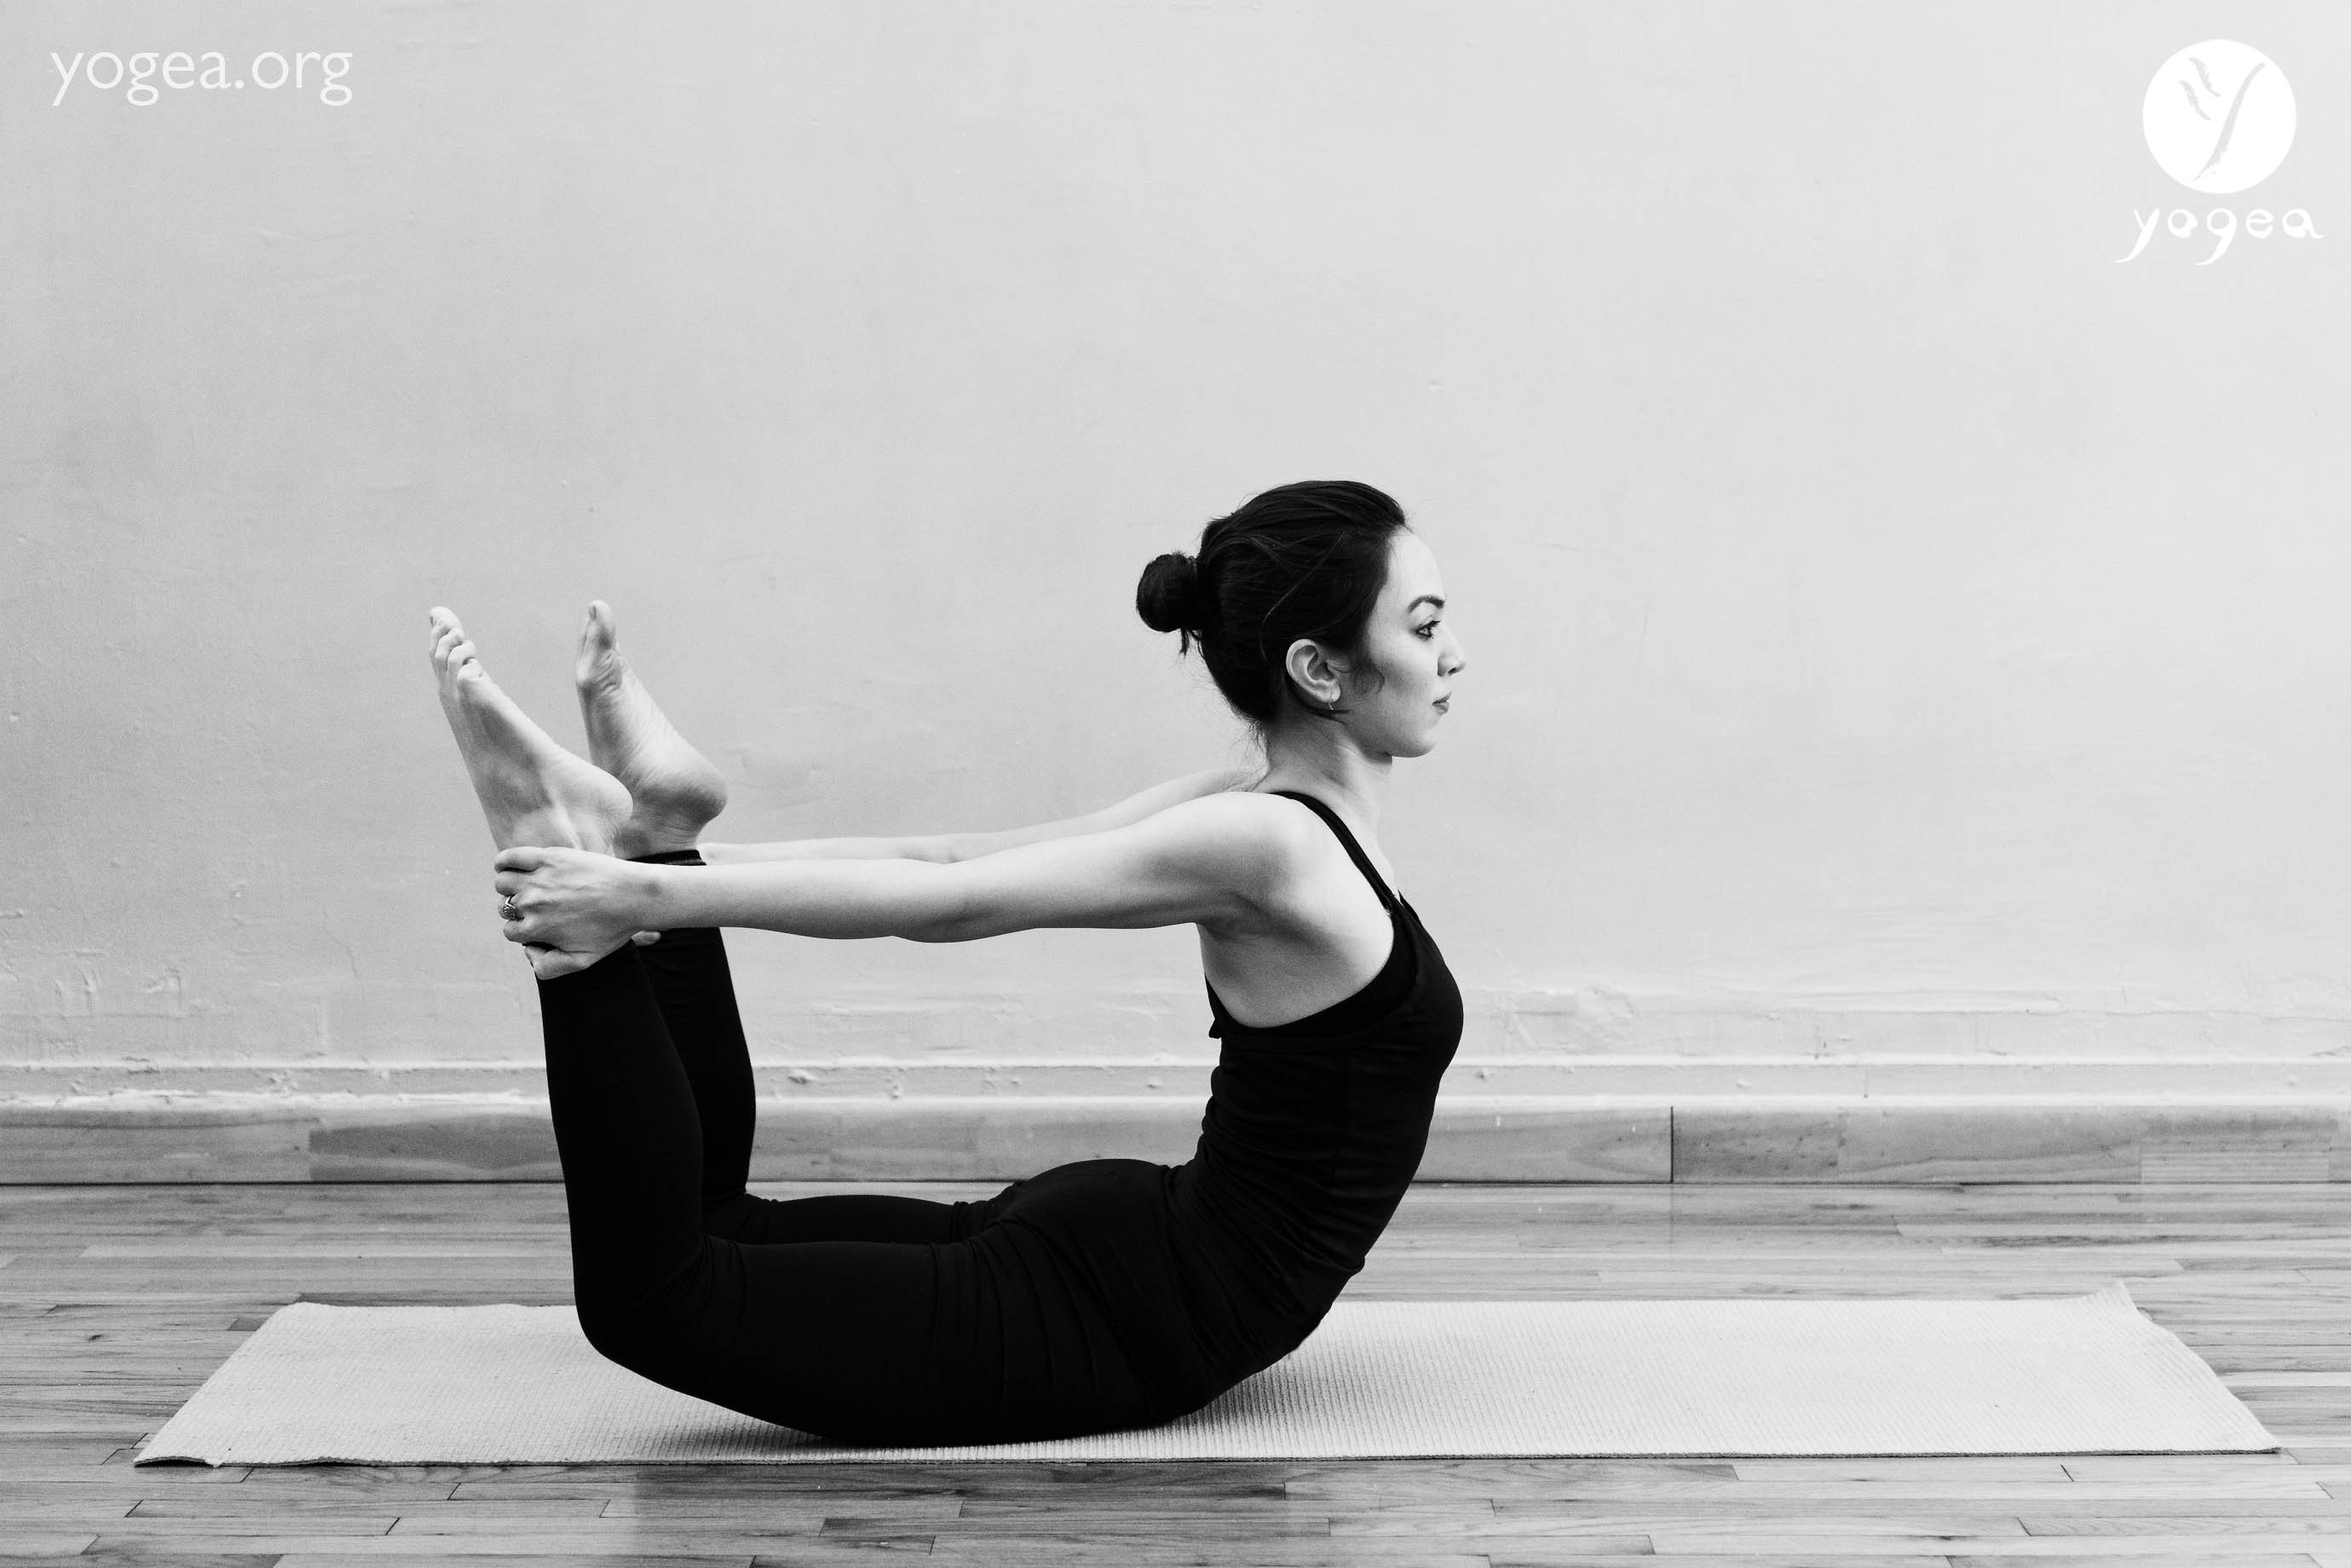 Yoga Prone Poses | Modifications, Variations And Tips